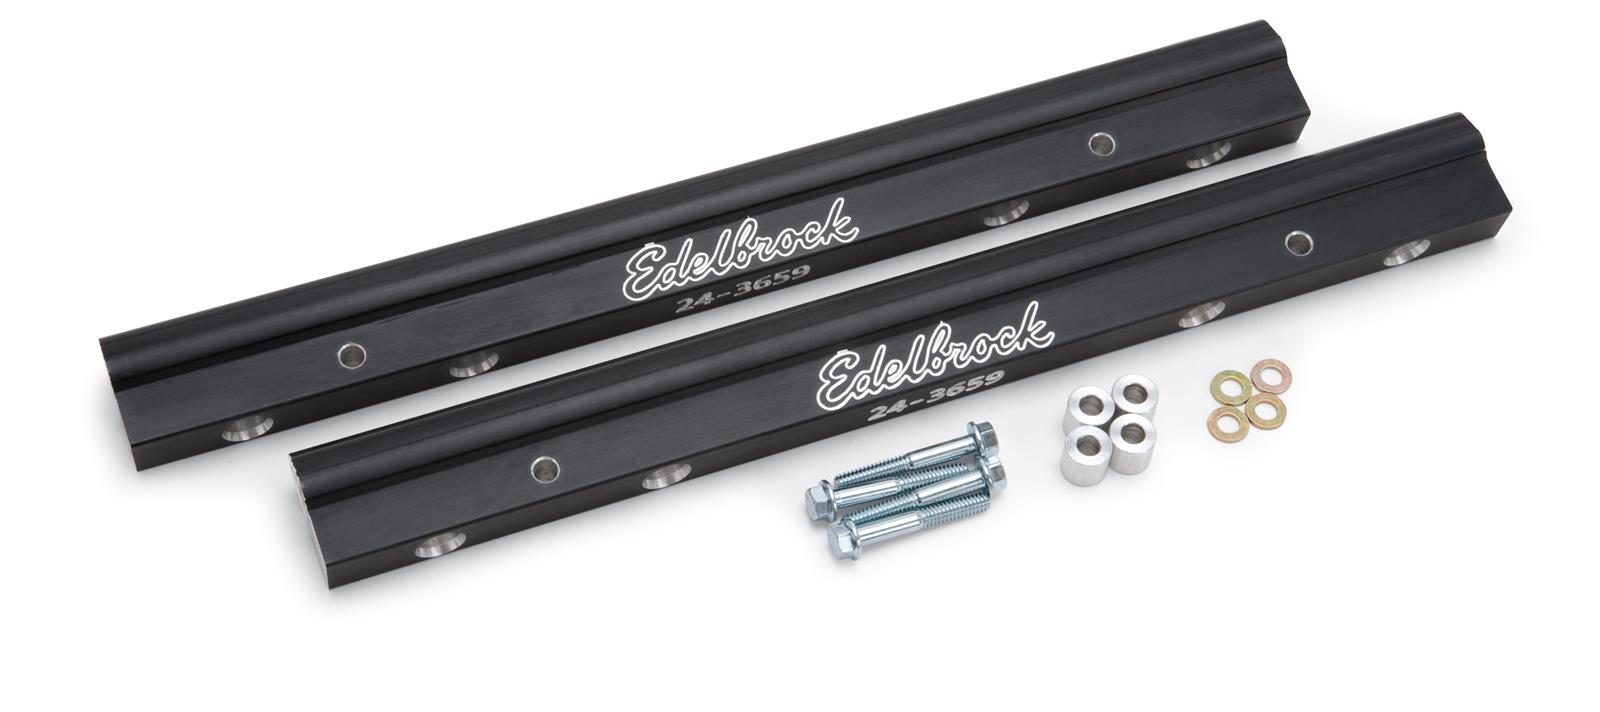 FUEL RAILS FOR VARIOUS MANIFOLDS